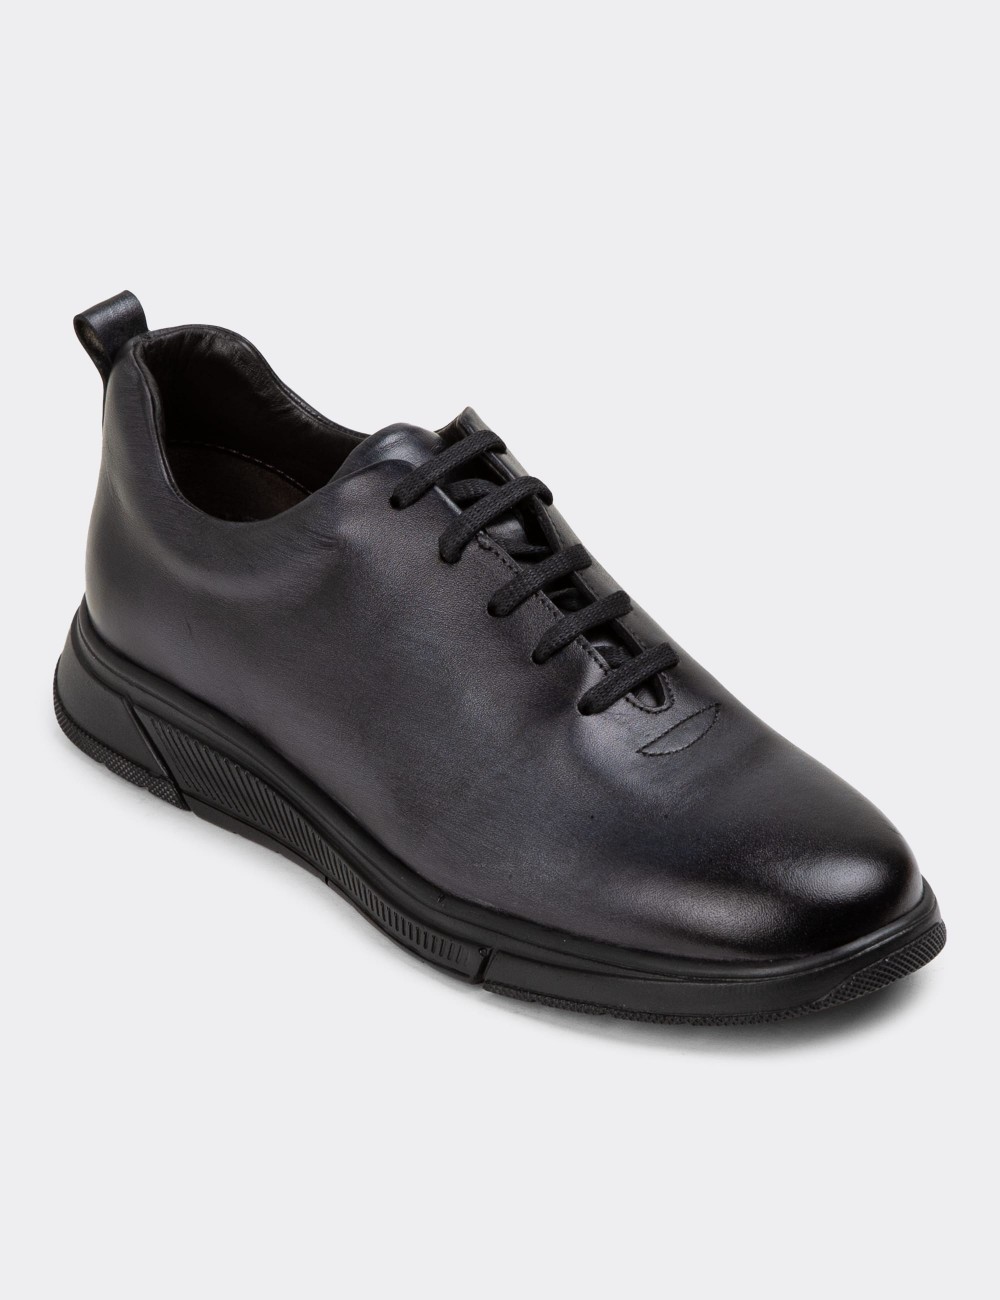 Anthracite Leather Lace-up Shoes - 01875MANTC01